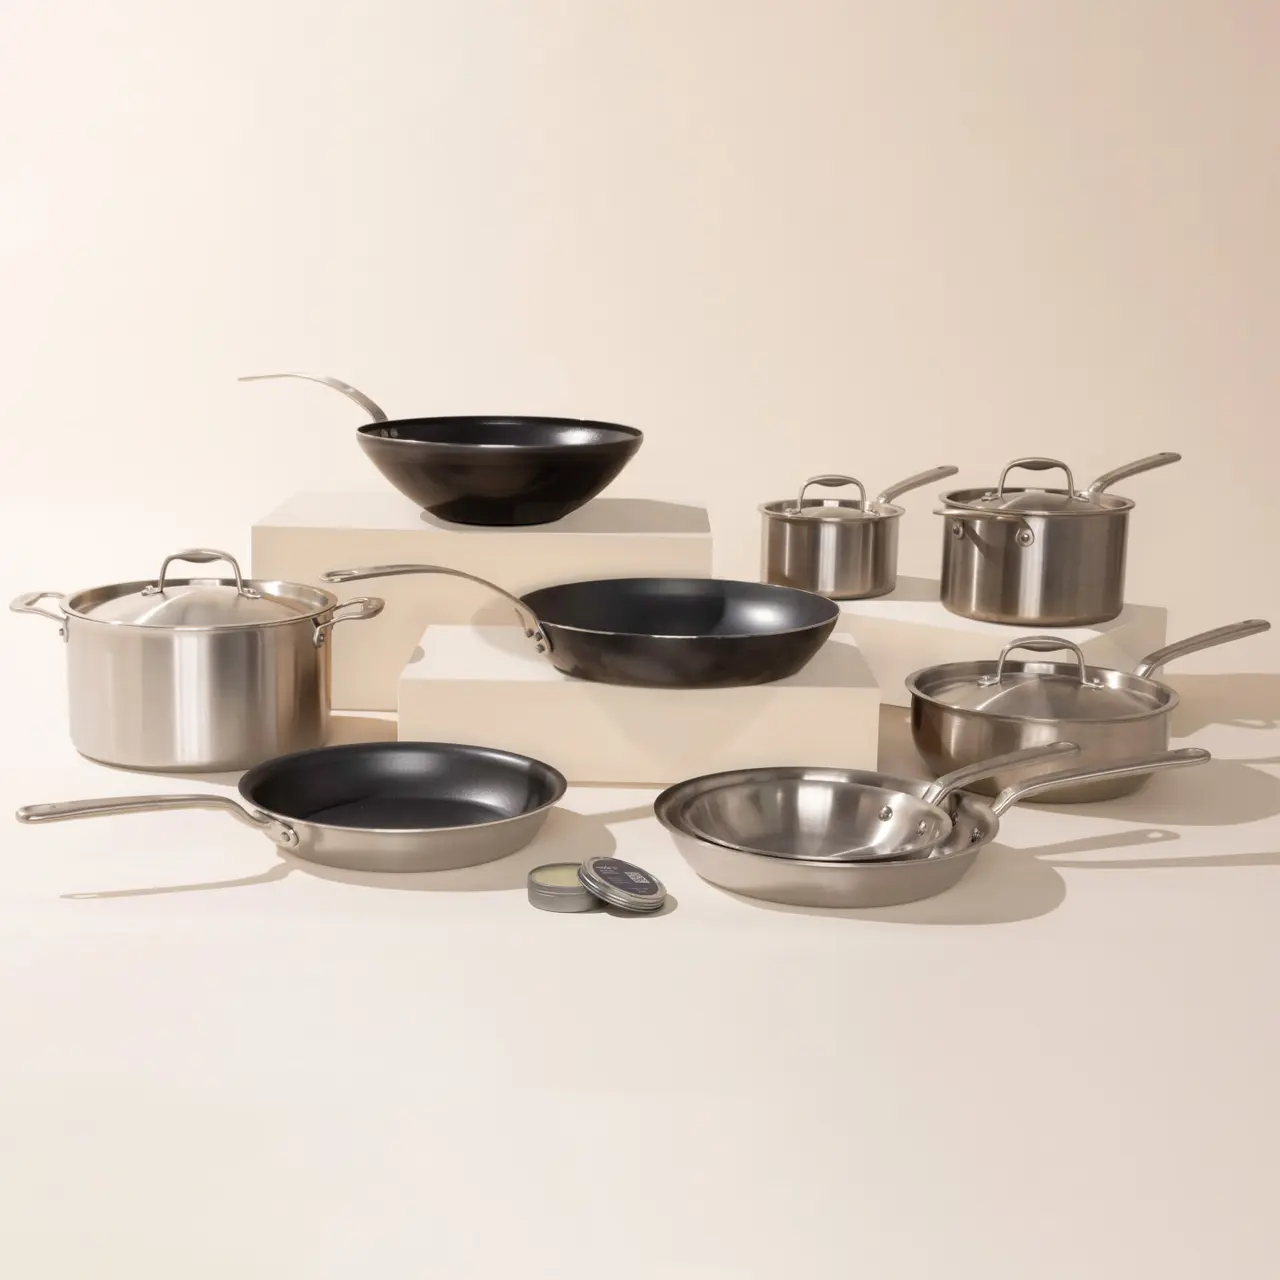 A variety of stainless steel and nonstick pots and pans are neatly arranged on a neutral background, showcasing a cookware set.